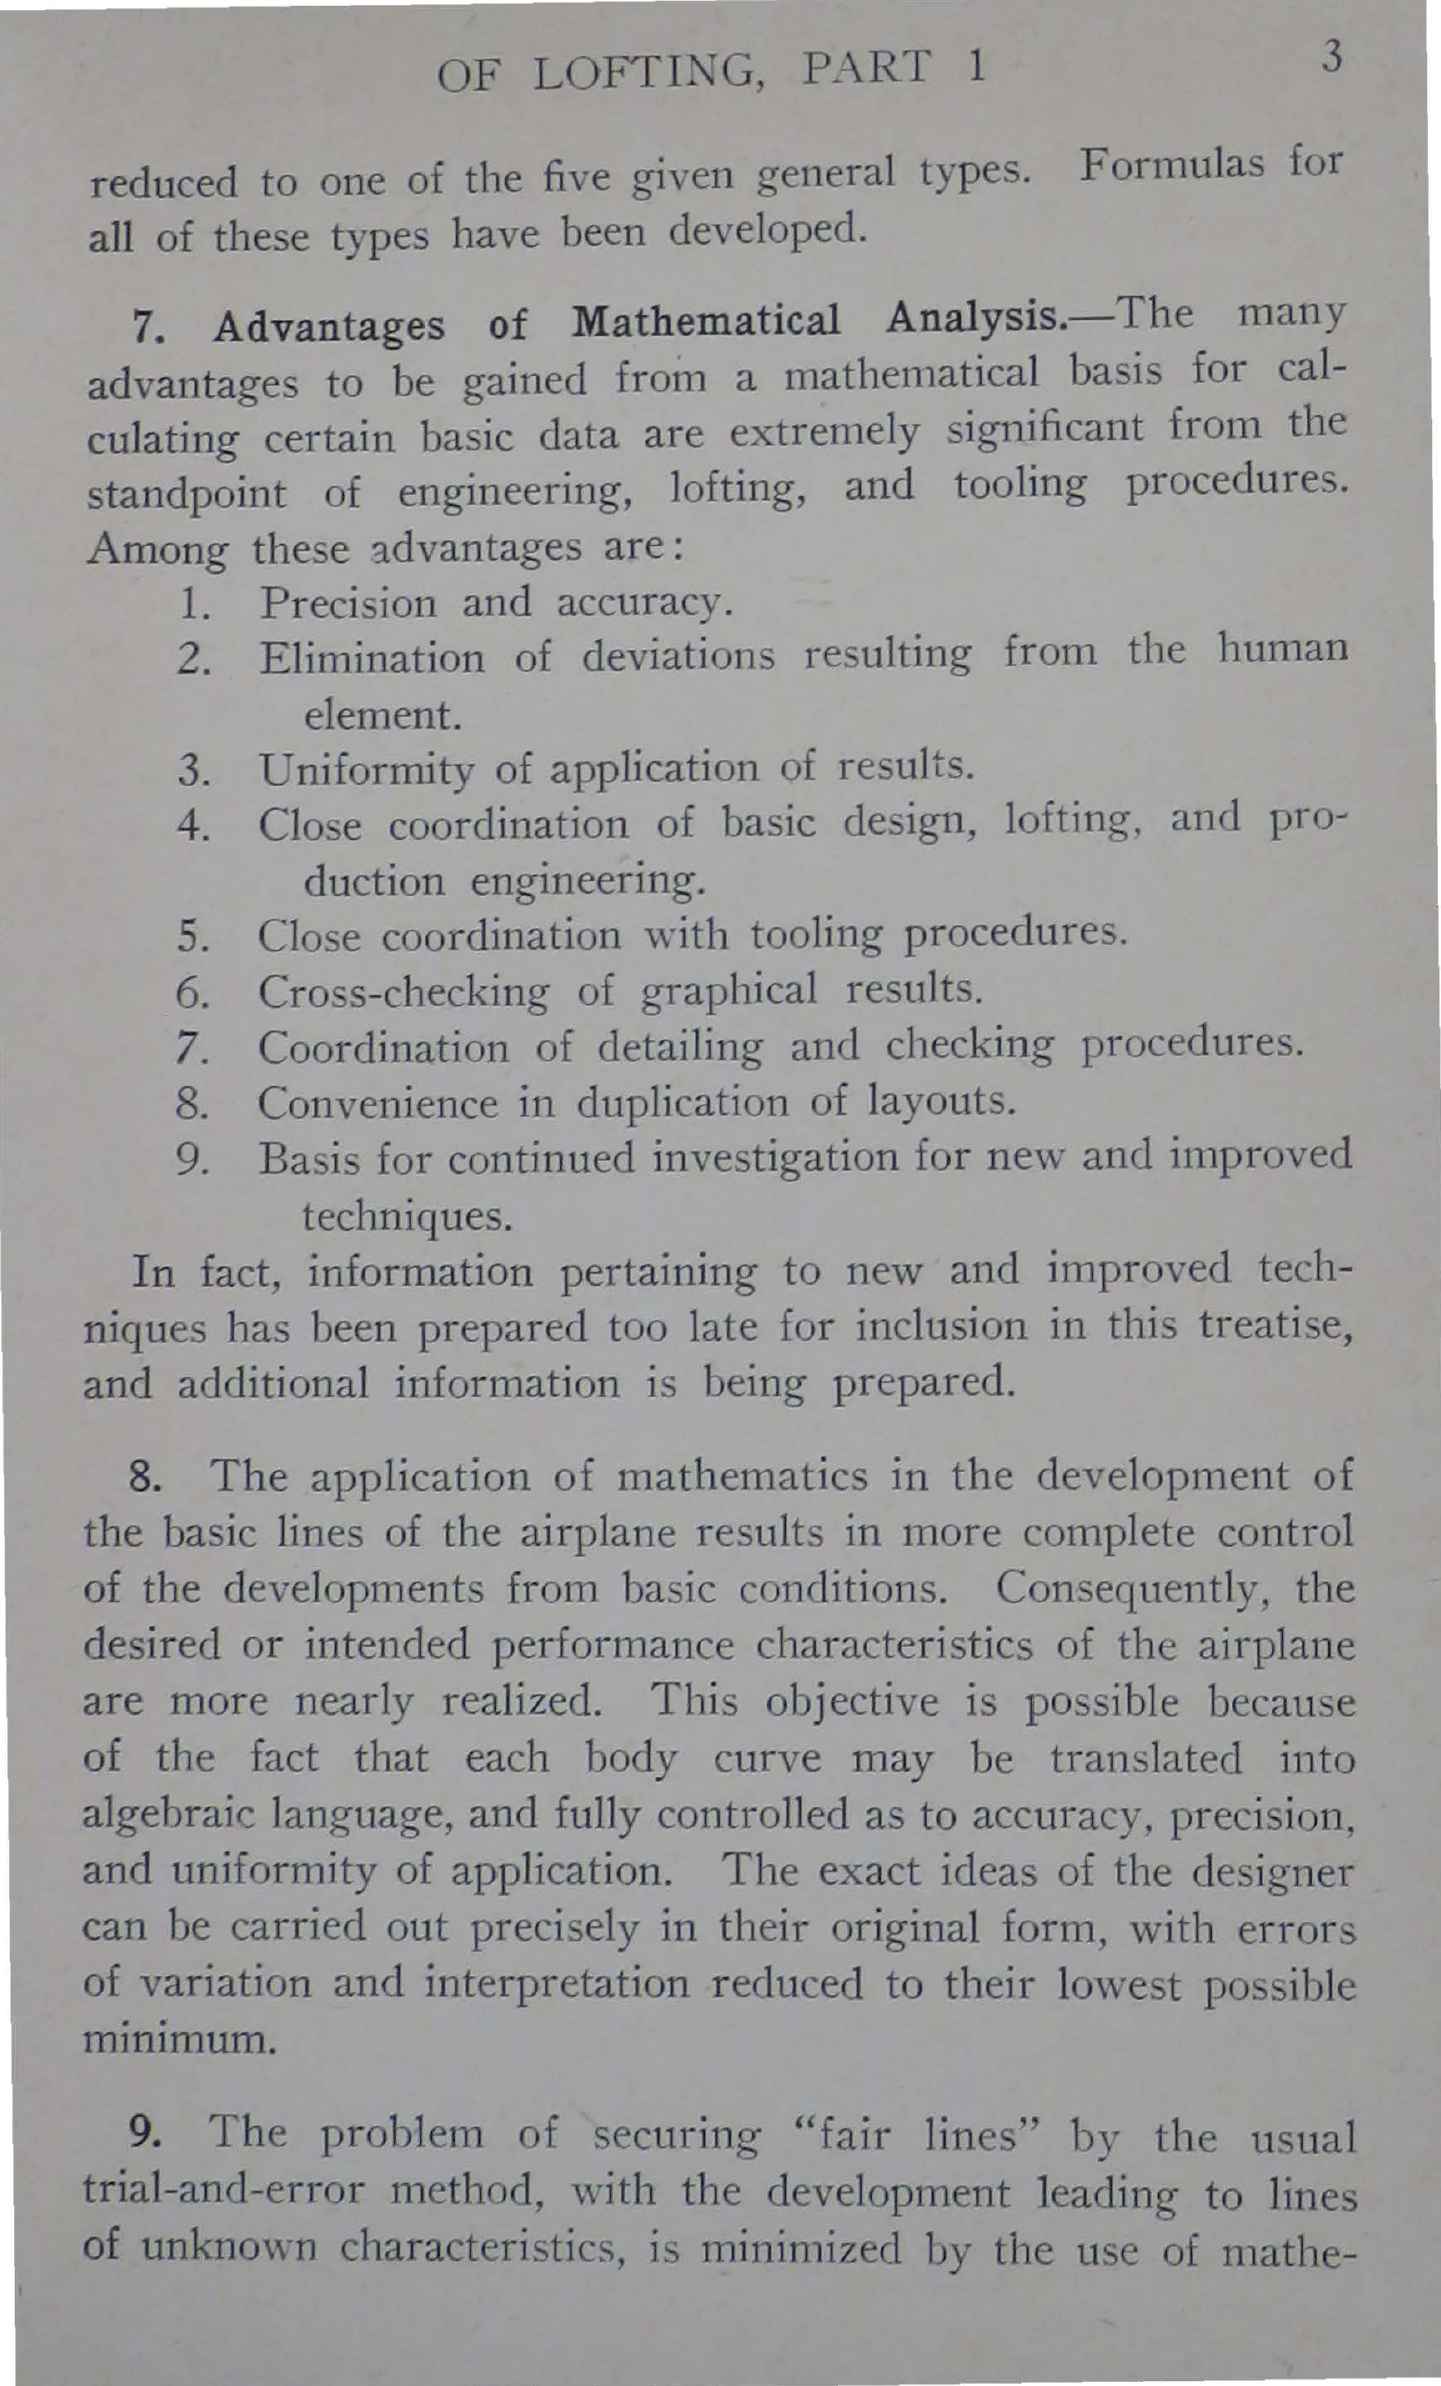 Sample page 5 from AirCorps Library document: Mathematical Technique of Lofting - Part 1 - Bureau of Aeronautics, 